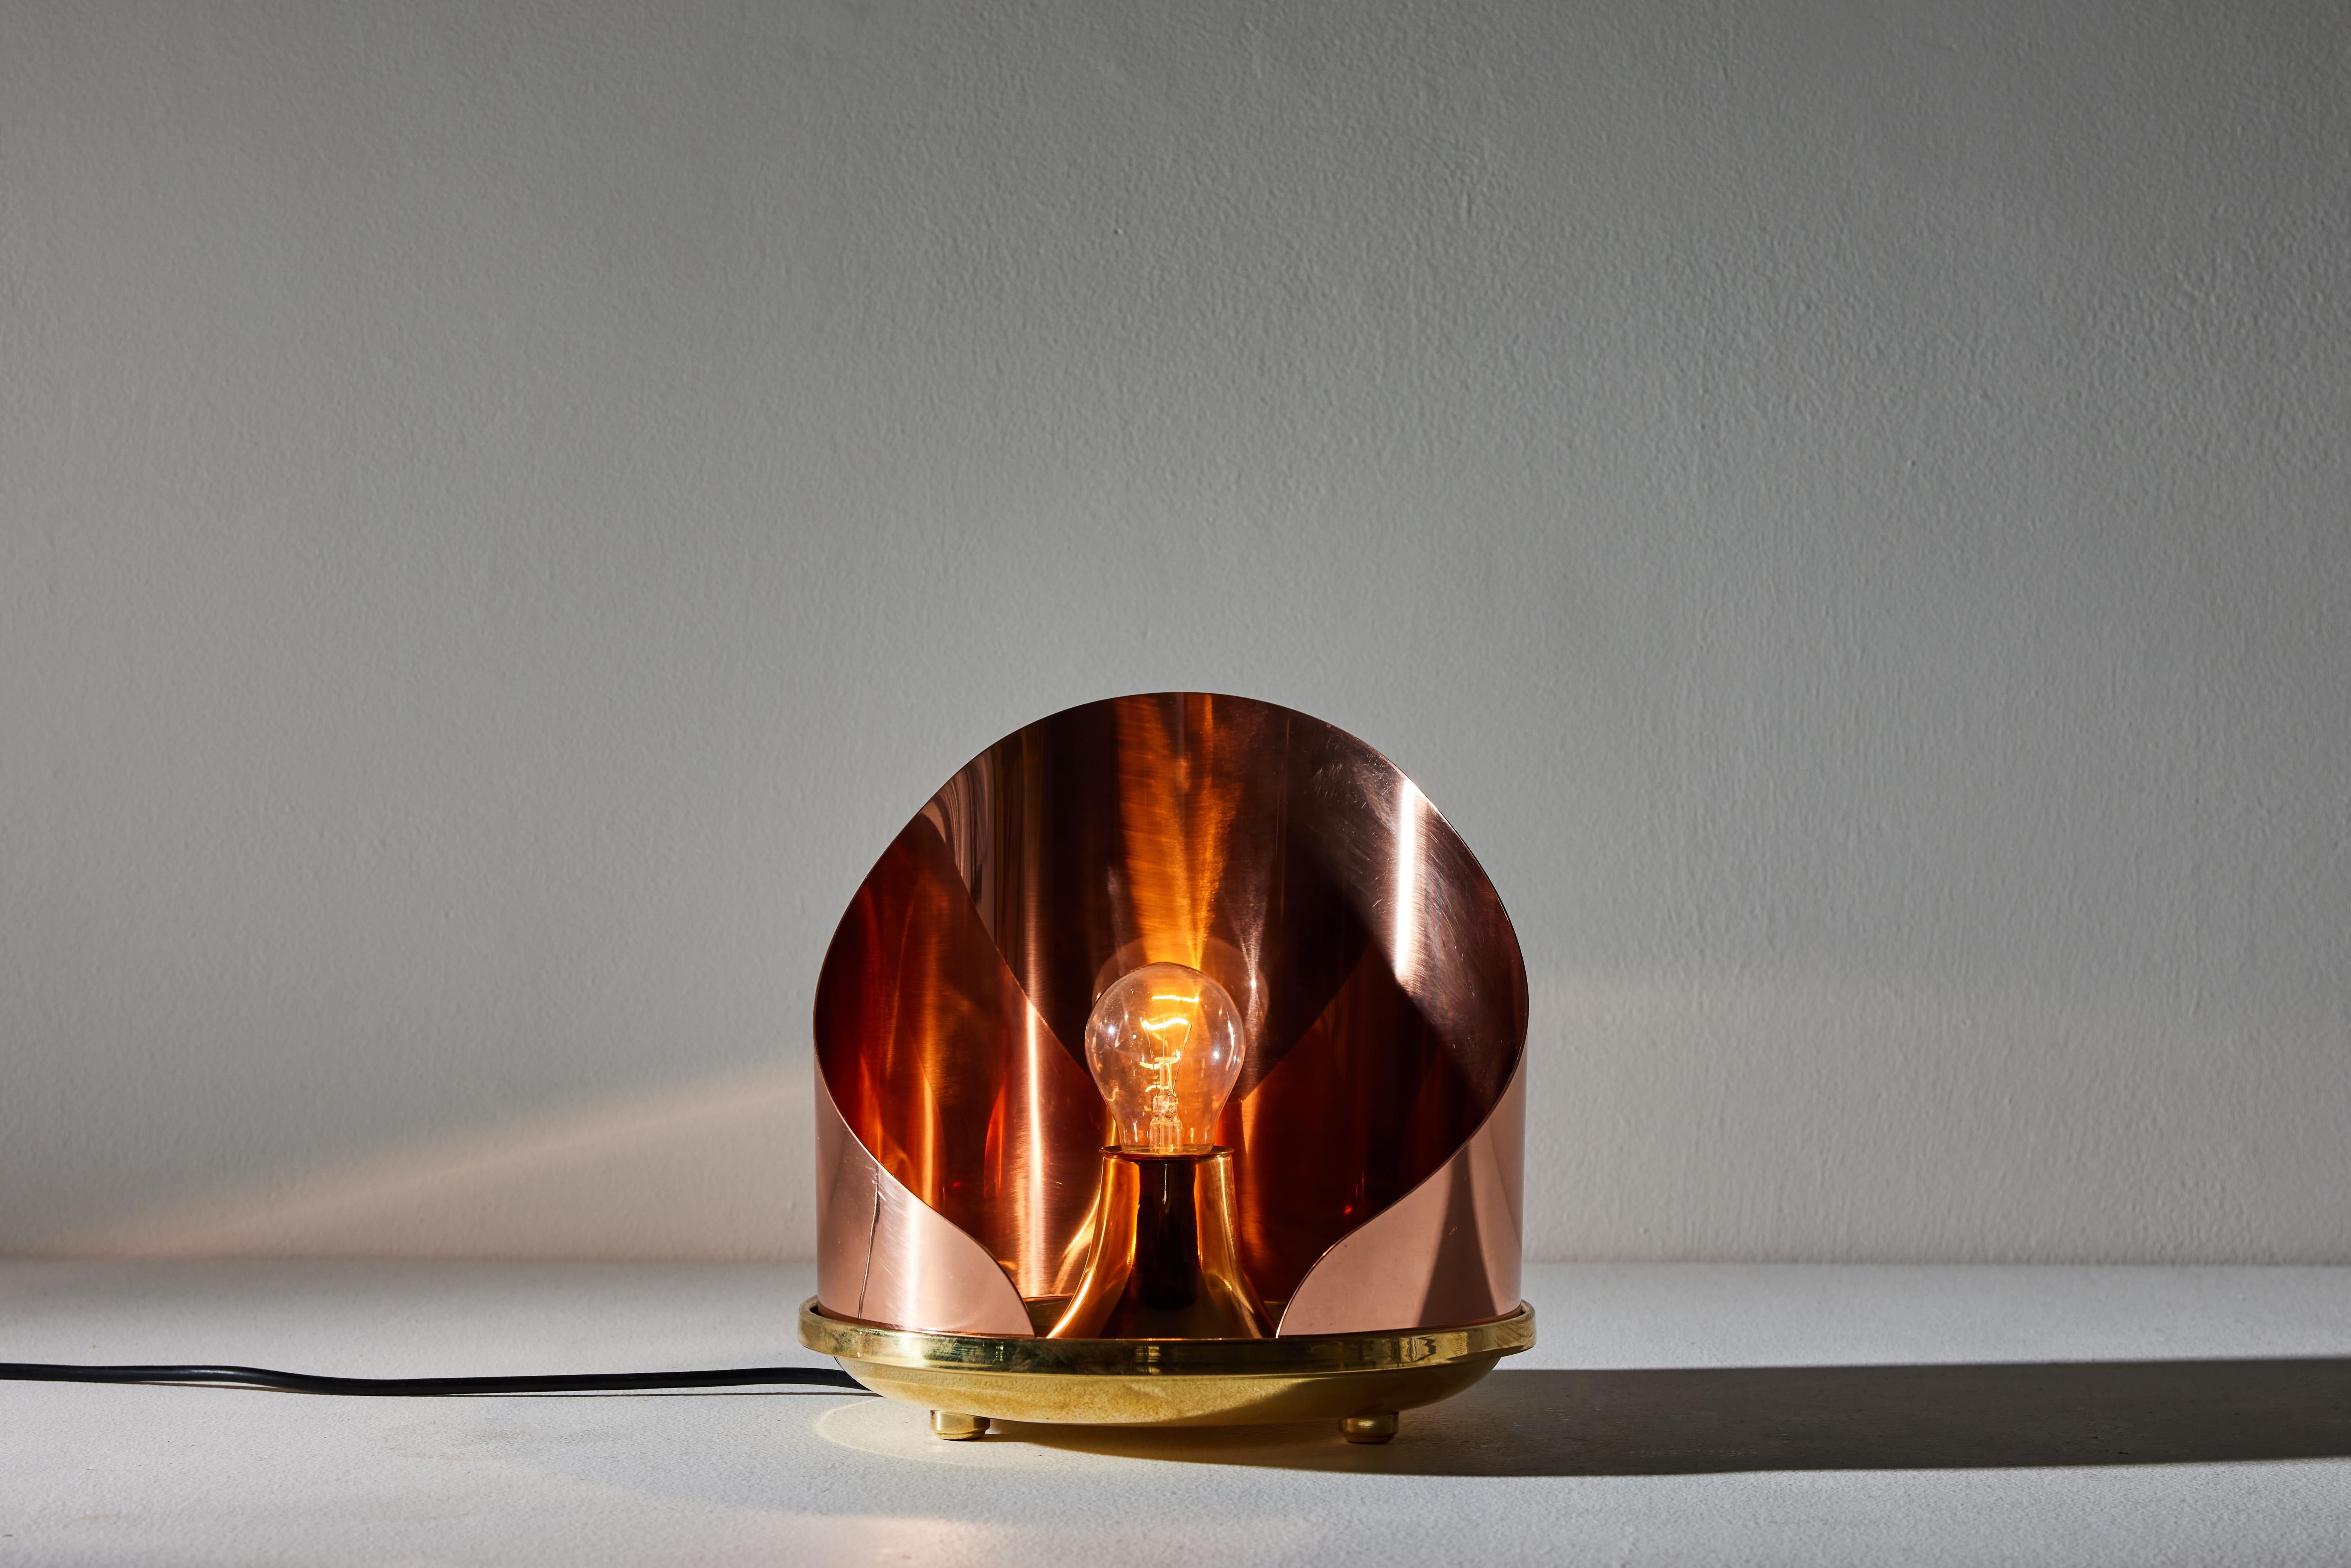 Model Lta12 Ventola table lamp by Luigi Caccia Dominioni for Azucena. Designed and manufactured in Italy, 1991. Copper, brass base. Original European cord. We recommend one E27 60w maximum bulb. Bulbs provided as a one time courtesy.